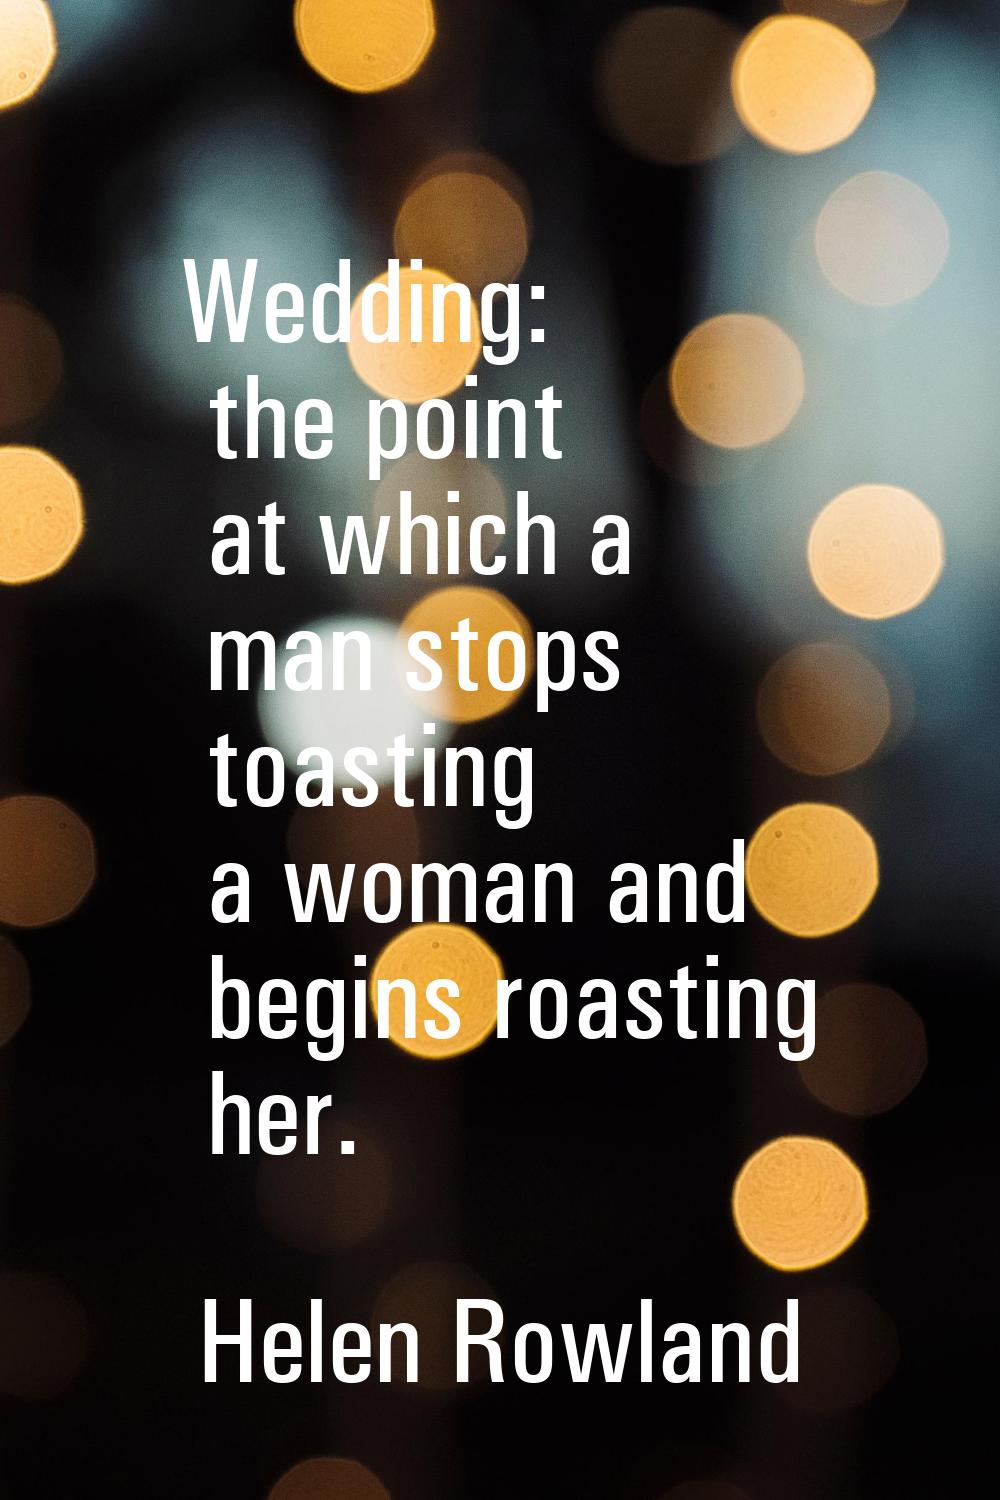 Wedding: the point at which a man stops toasting a woman and begins roasting her.